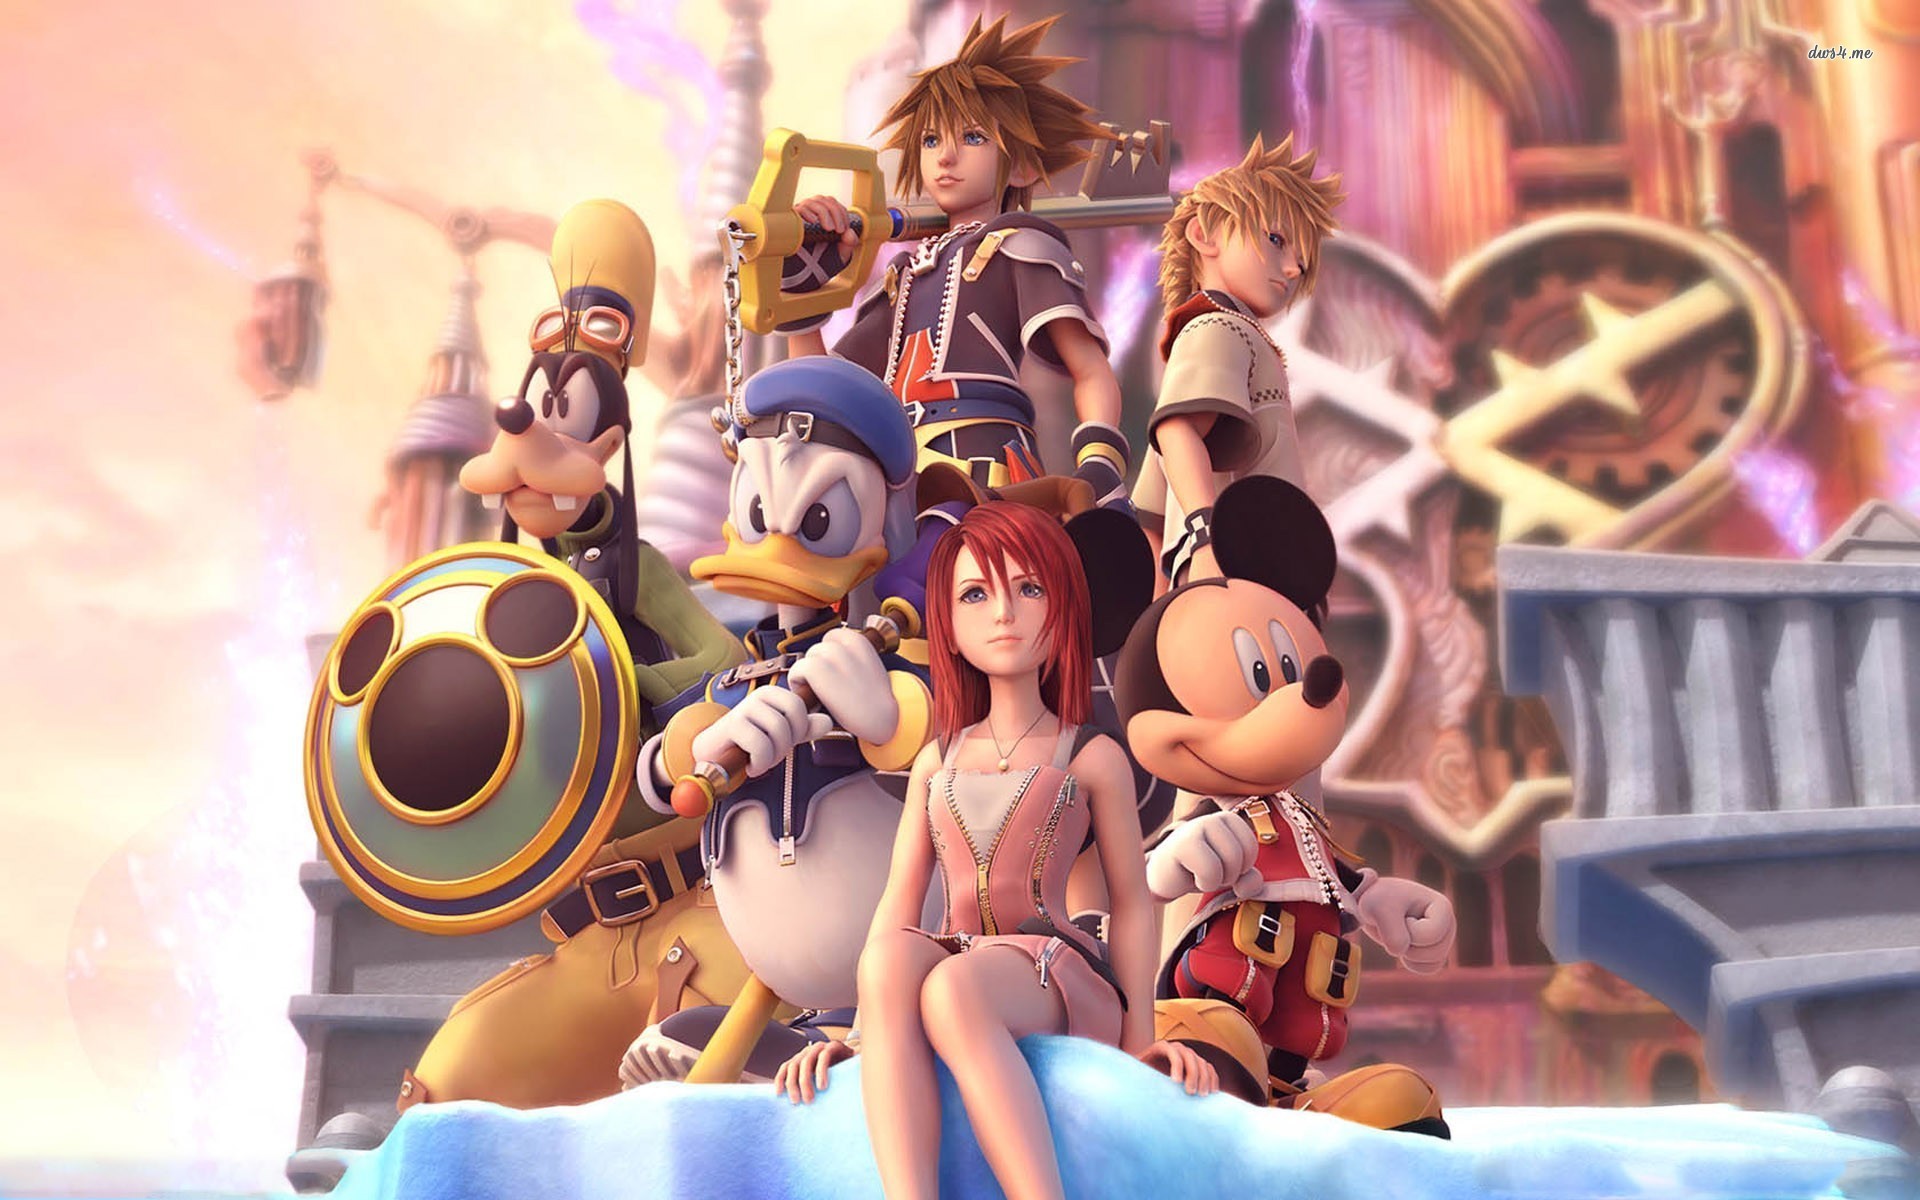 1920x1200 Kingdom Hearts wallpaper - Game wallpapers - #8515